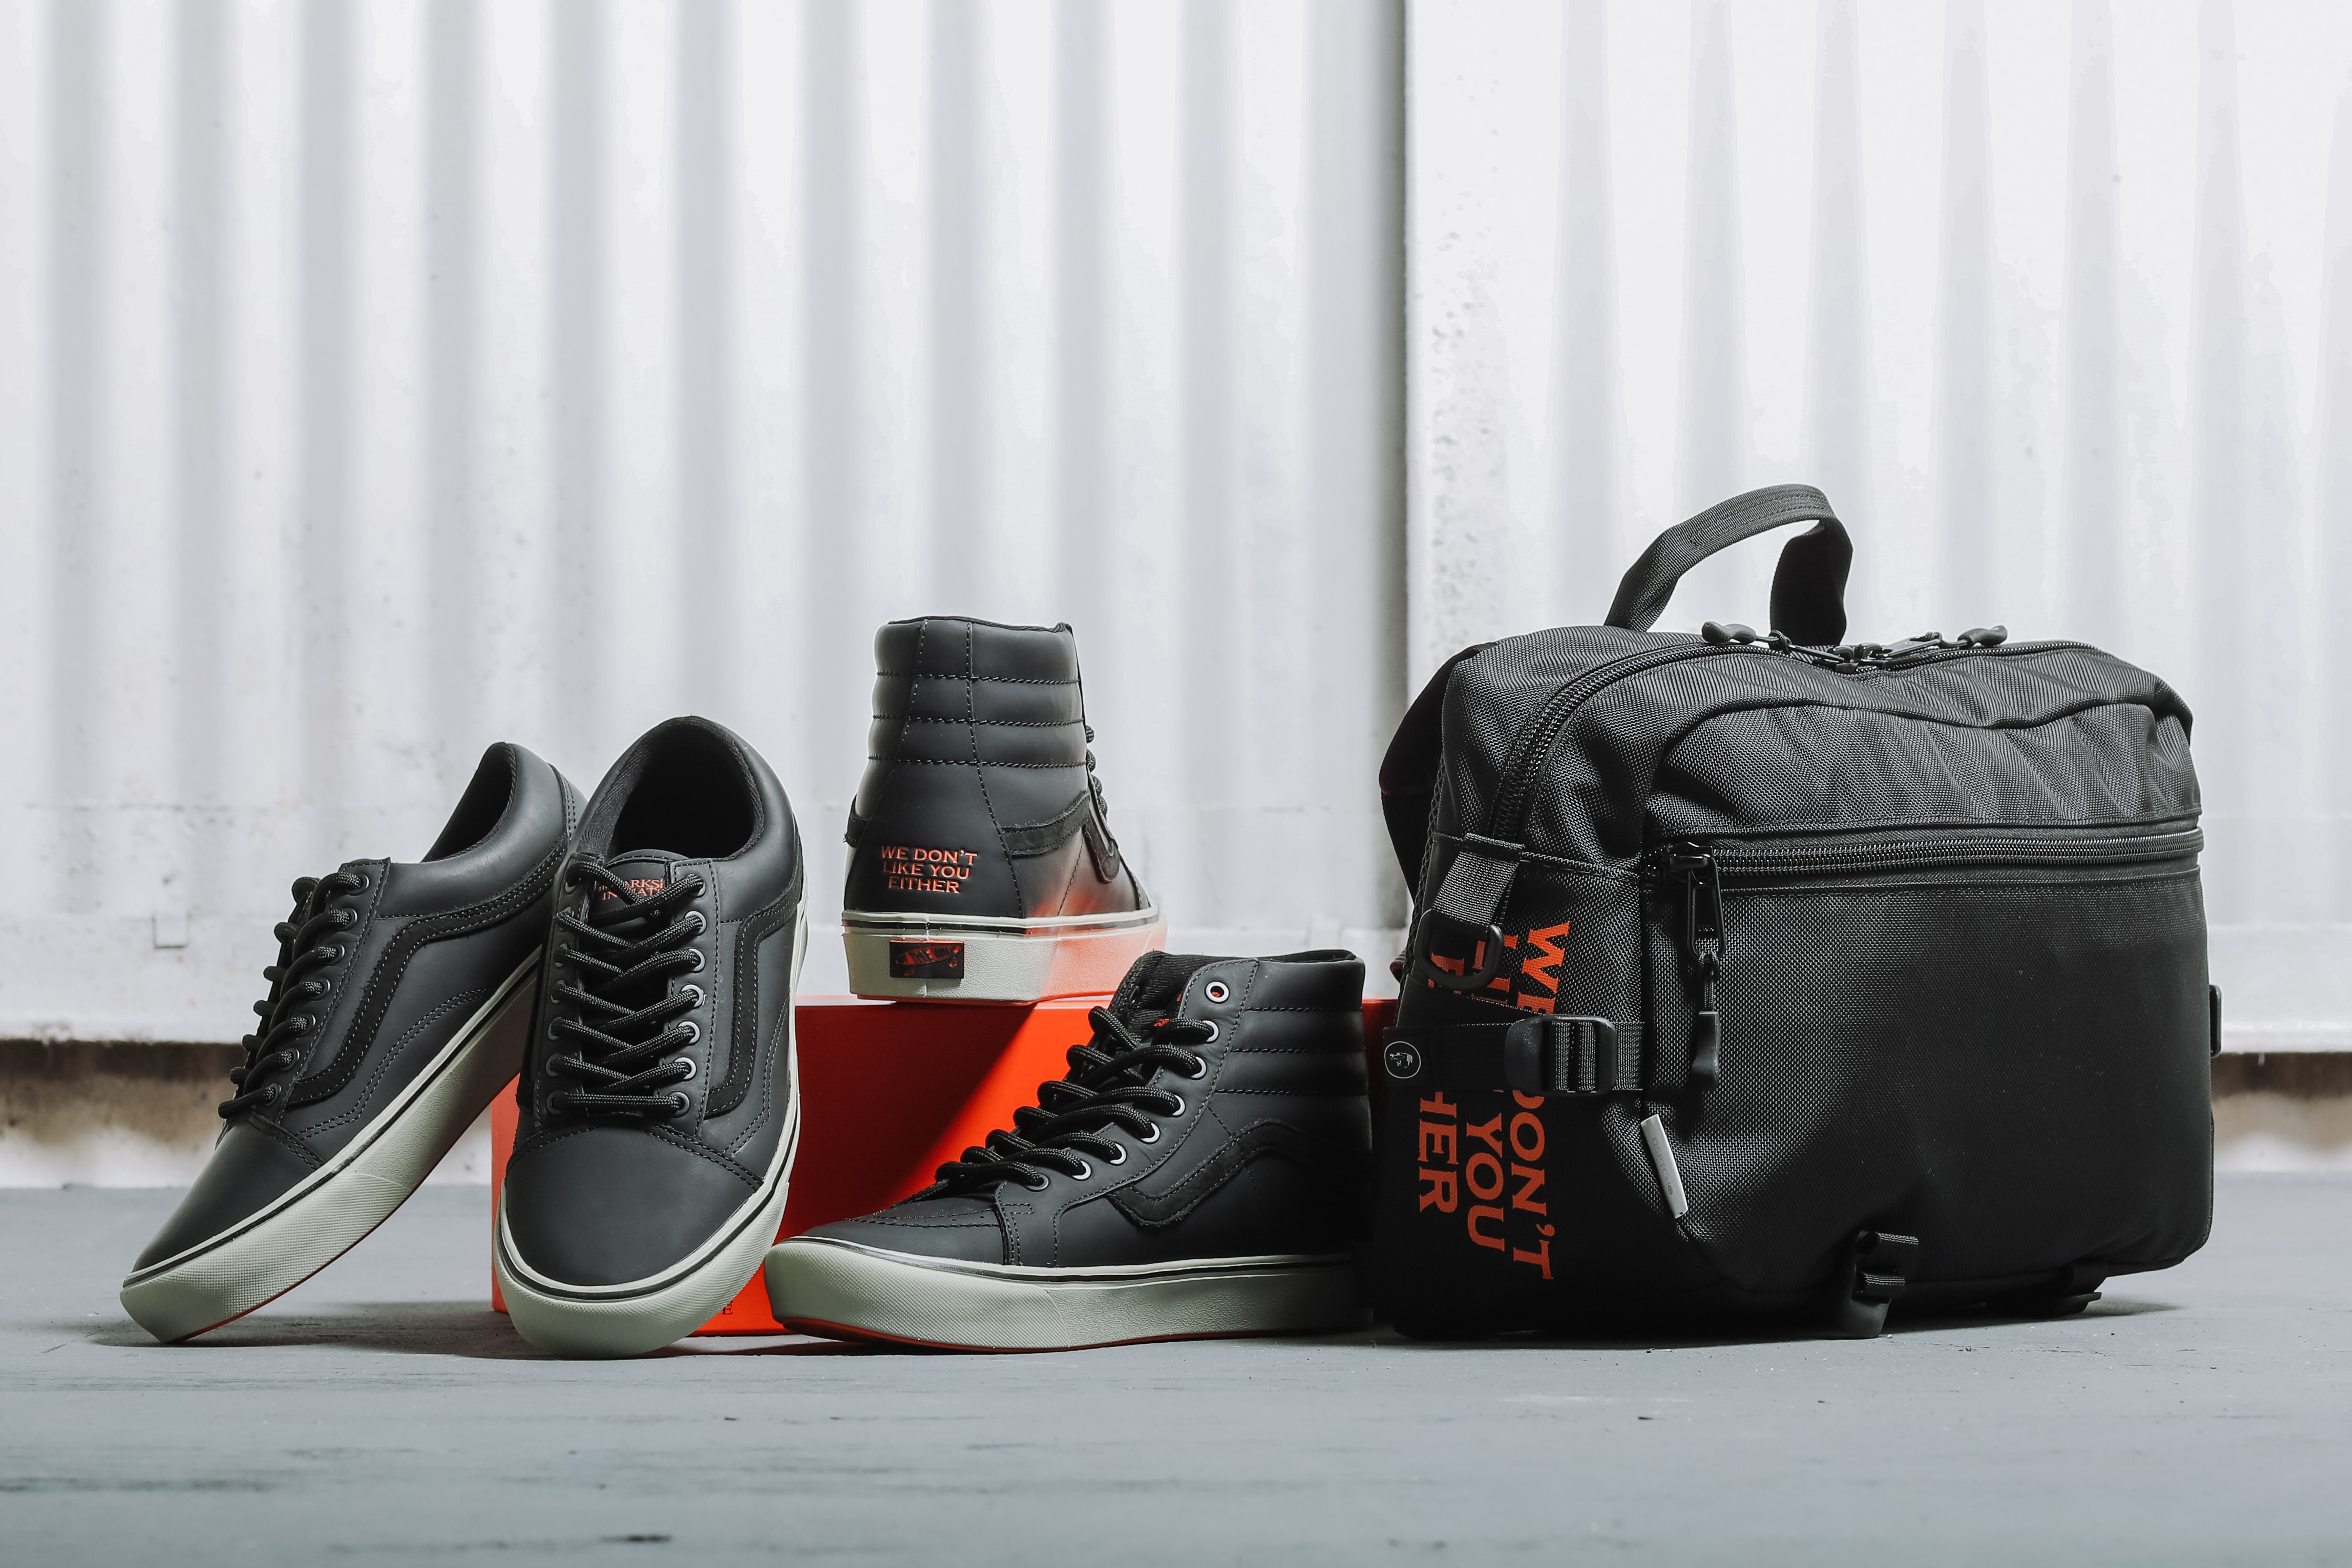 The Darkside Initiative and Vans Vault ComfyCush LX Pack